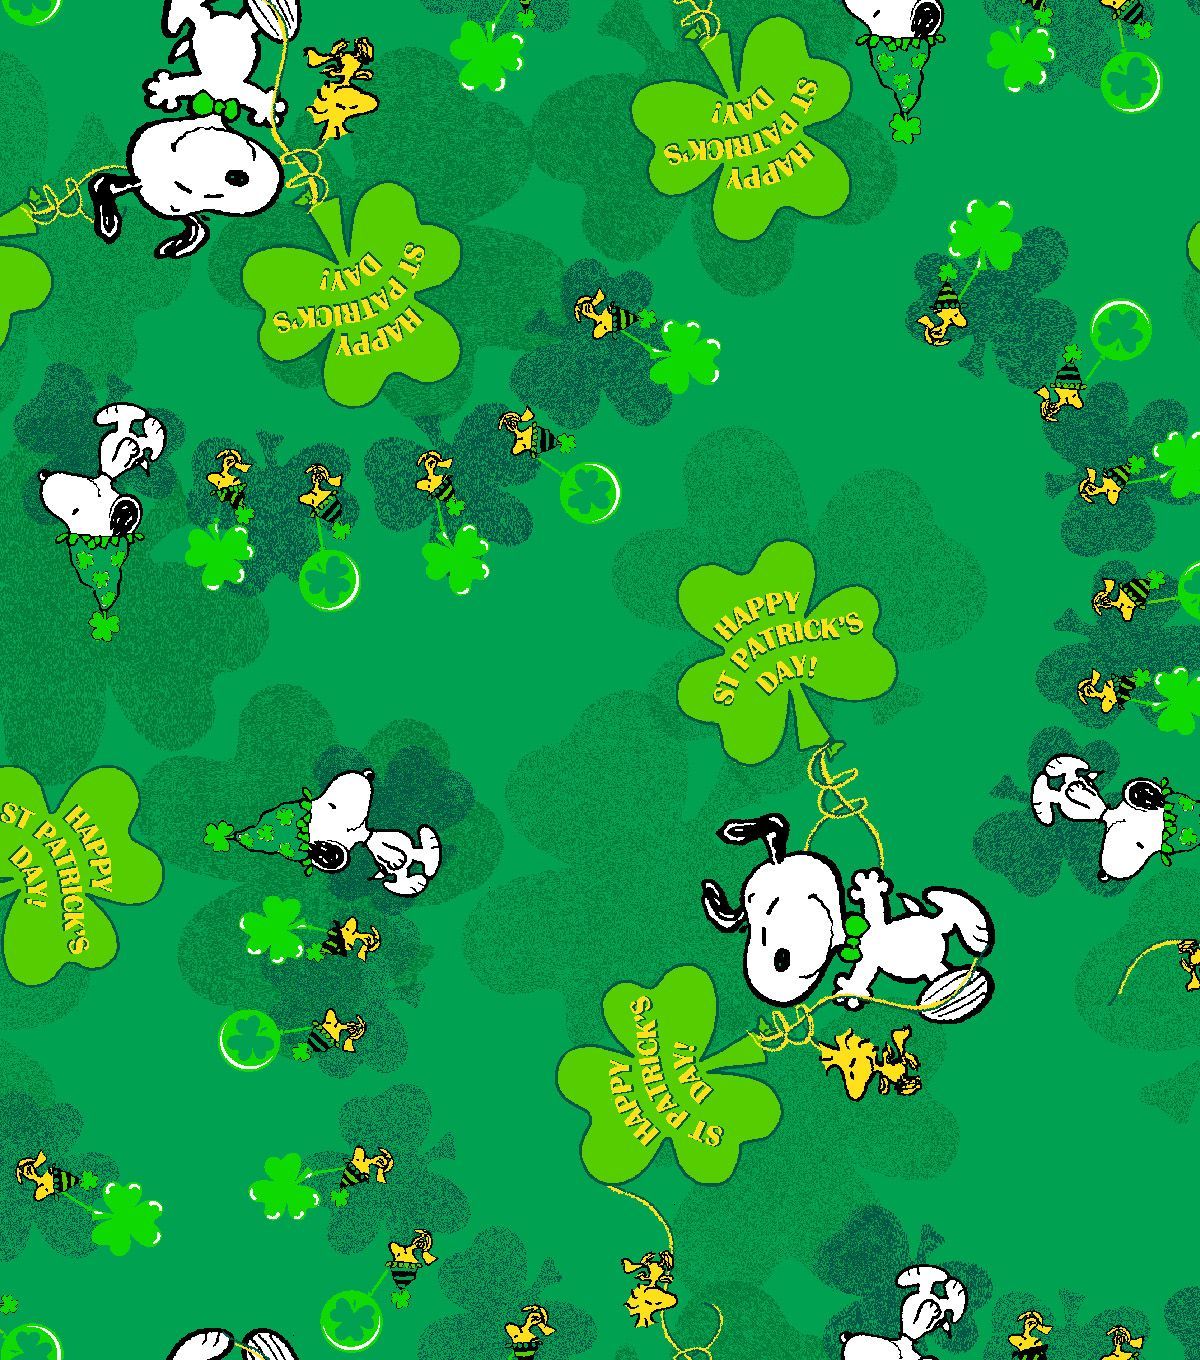 Download Carnations Saint Patrick's Day Wallpapers